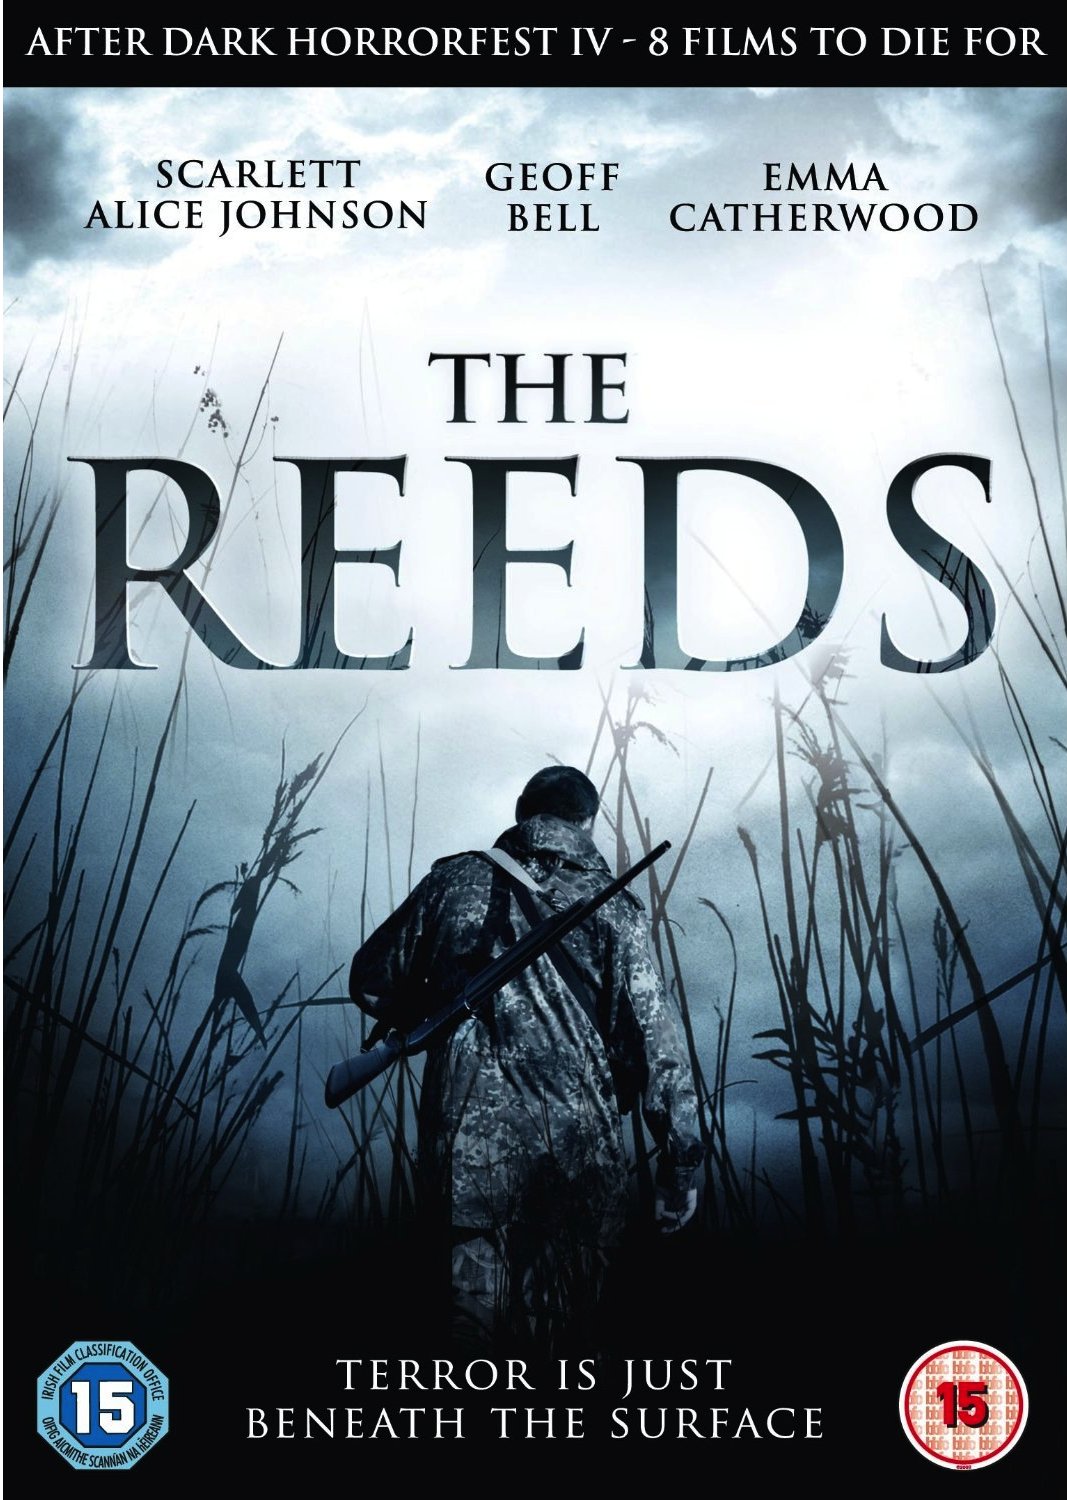 'The Reeds' - UK DVD release box 25 June 2012